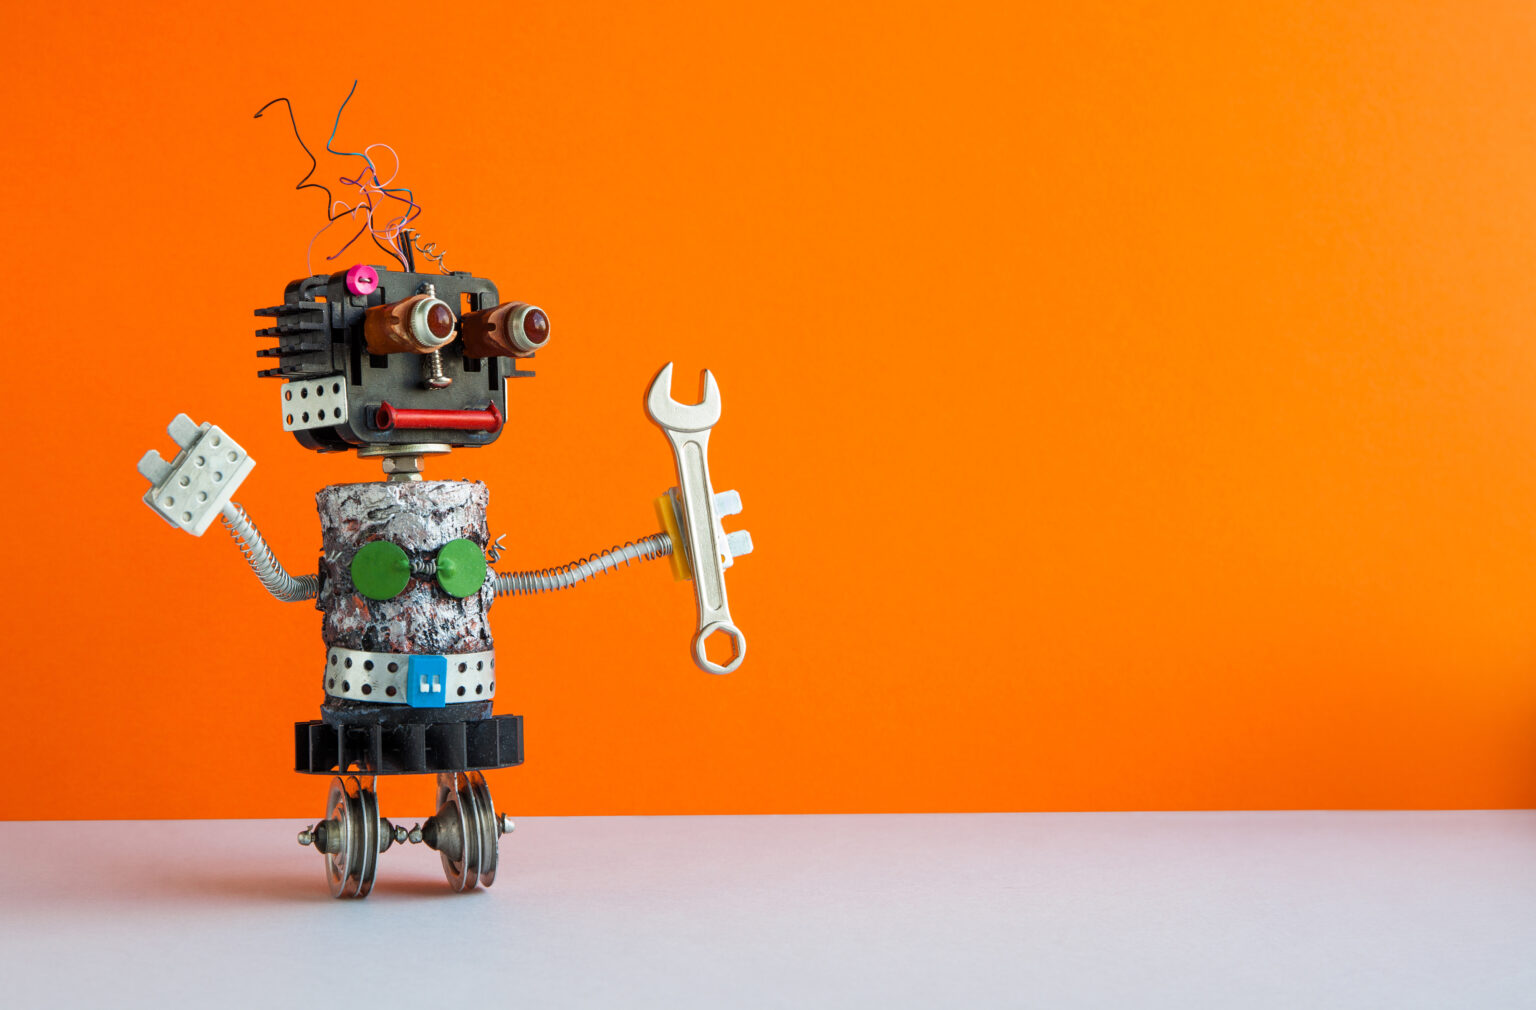 Robot handyman with hand wrench. Fixing maintenance concept. Creative design mechanic two weels robotic character. Orange wall, gray floor background, illustrating here Machine Learning and PHP